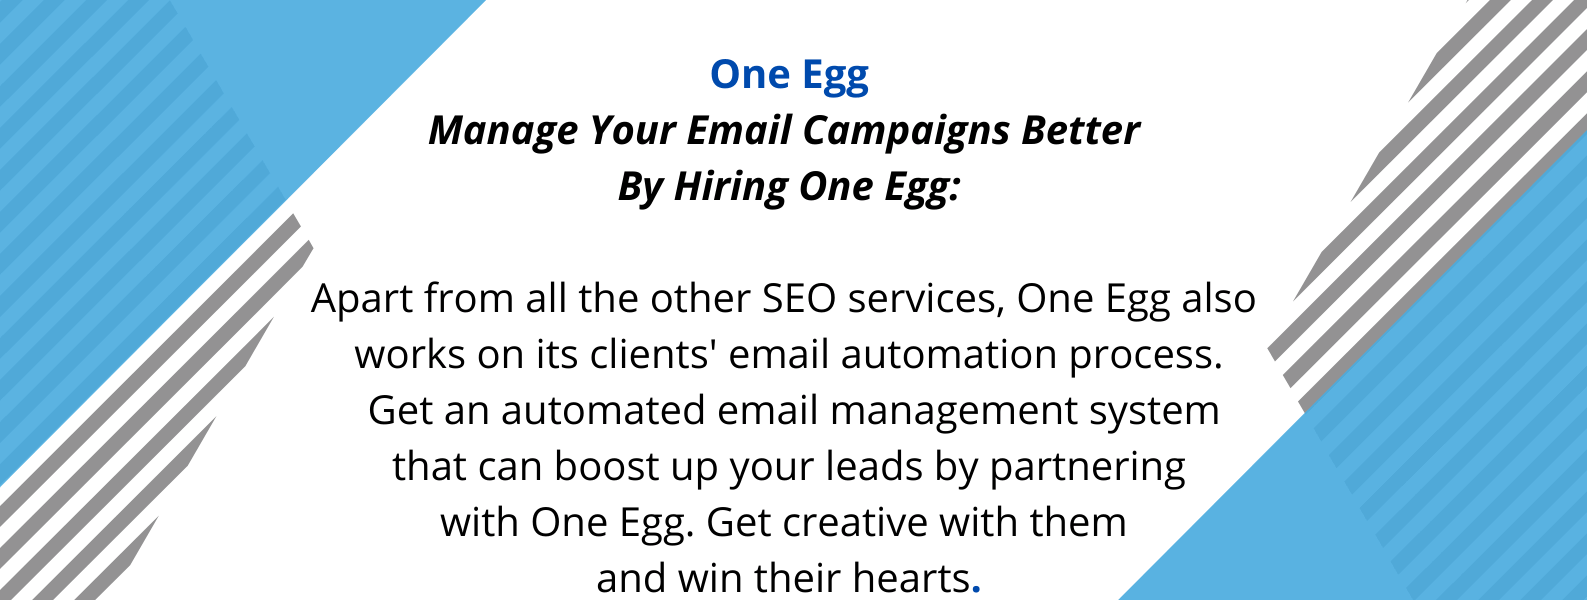 UNique selling proposition of one egg - a digital marketing agency.